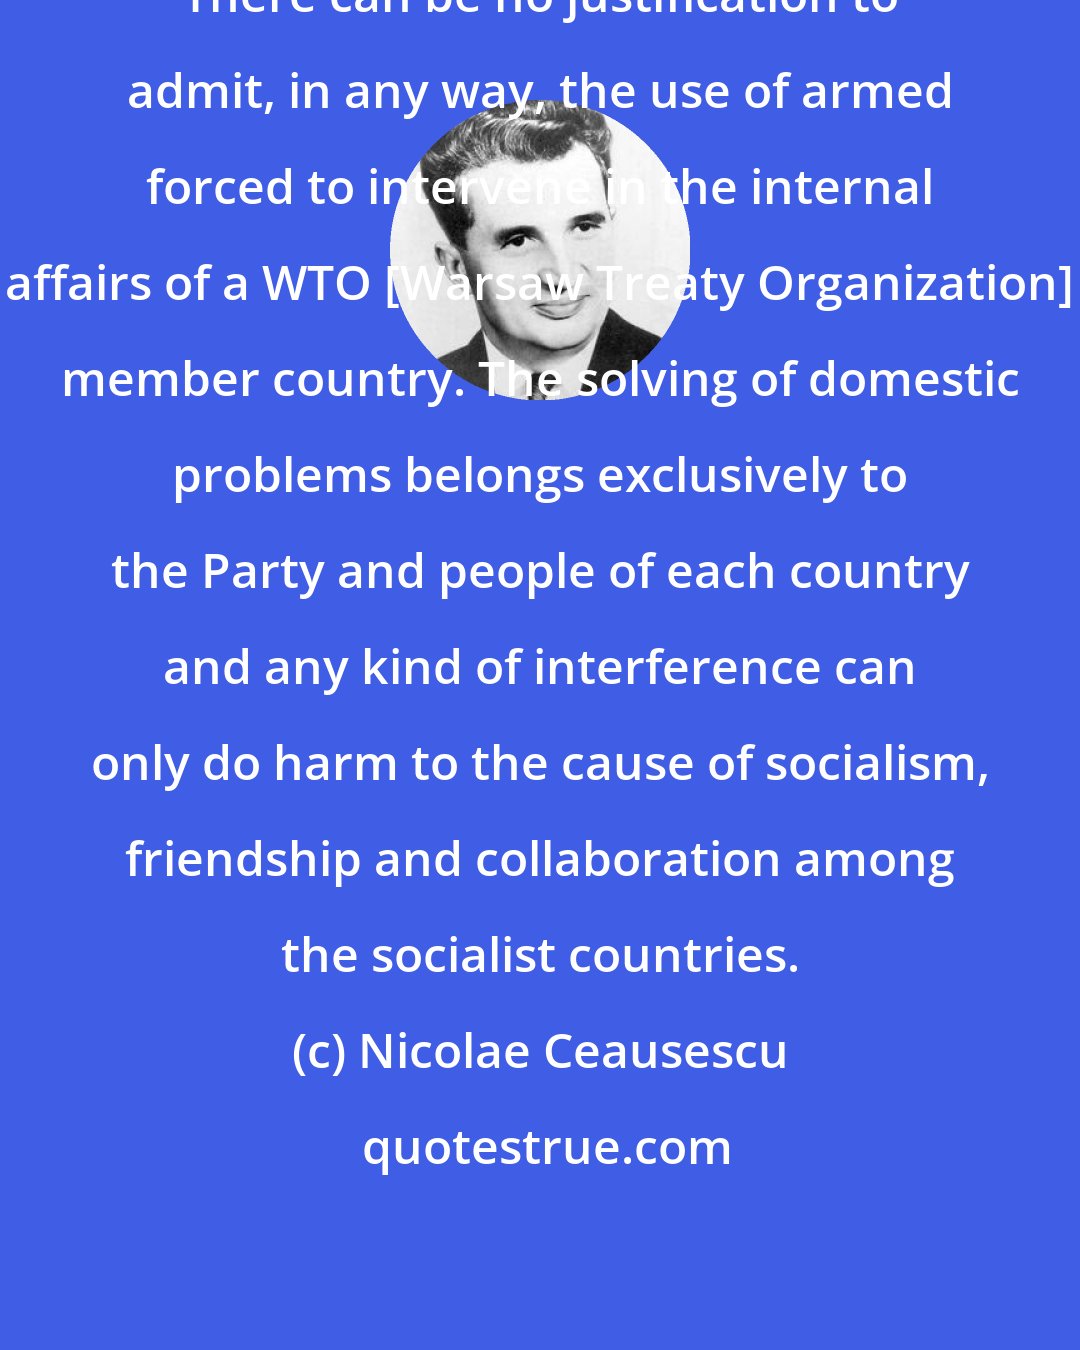 Nicolae Ceausescu: There can be no justification to admit, in any way, the use of armed forced to intervene in the internal affairs of a WTO [Warsaw Treaty Organization] member country. The solving of domestic problems belongs exclusively to the Party and people of each country and any kind of interference can only do harm to the cause of socialism, friendship and collaboration among the socialist countries.